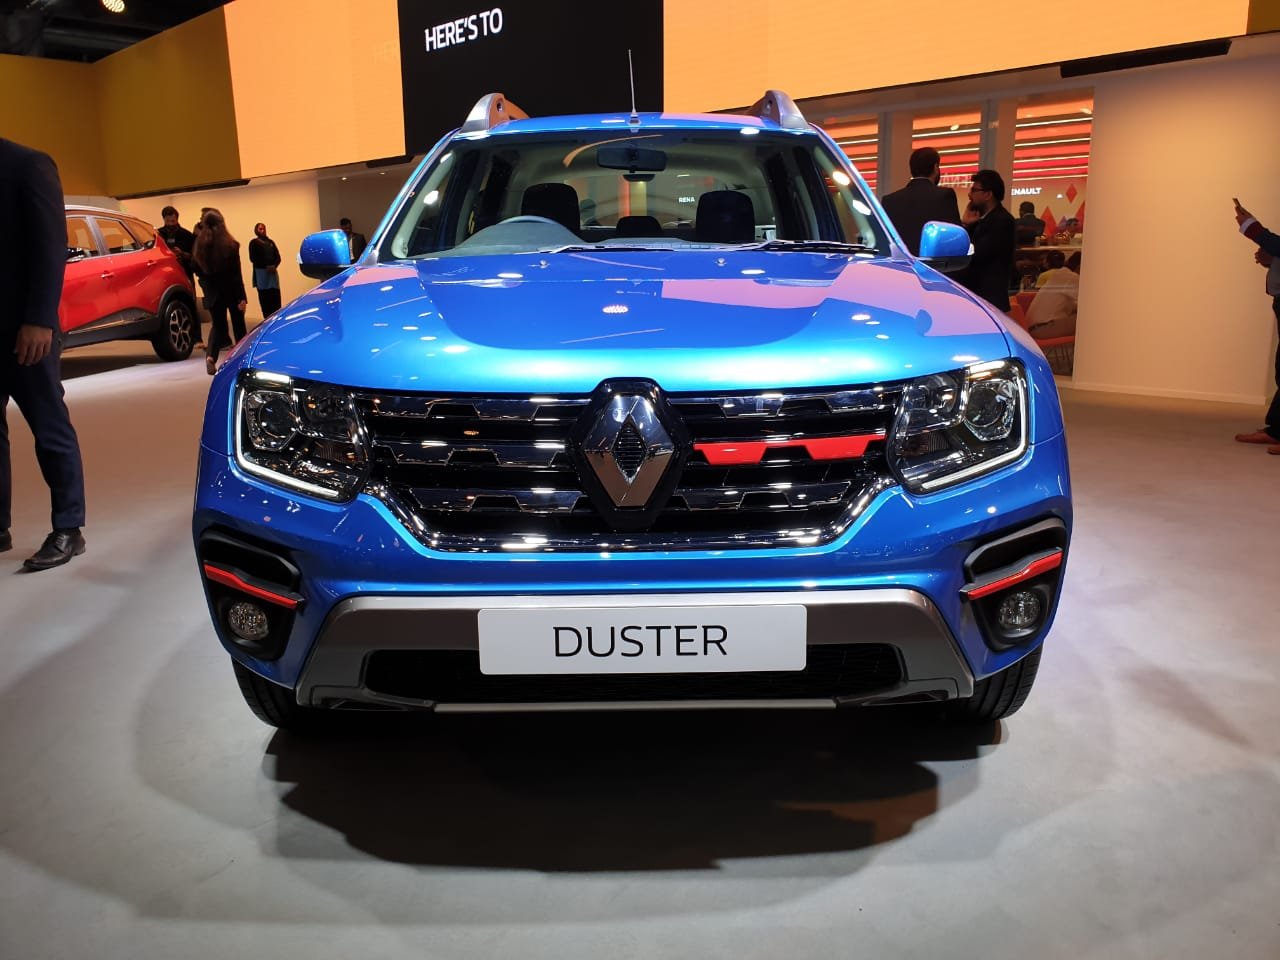 Renault Duster turbocharged petrol showcased at Auto Expo 2020